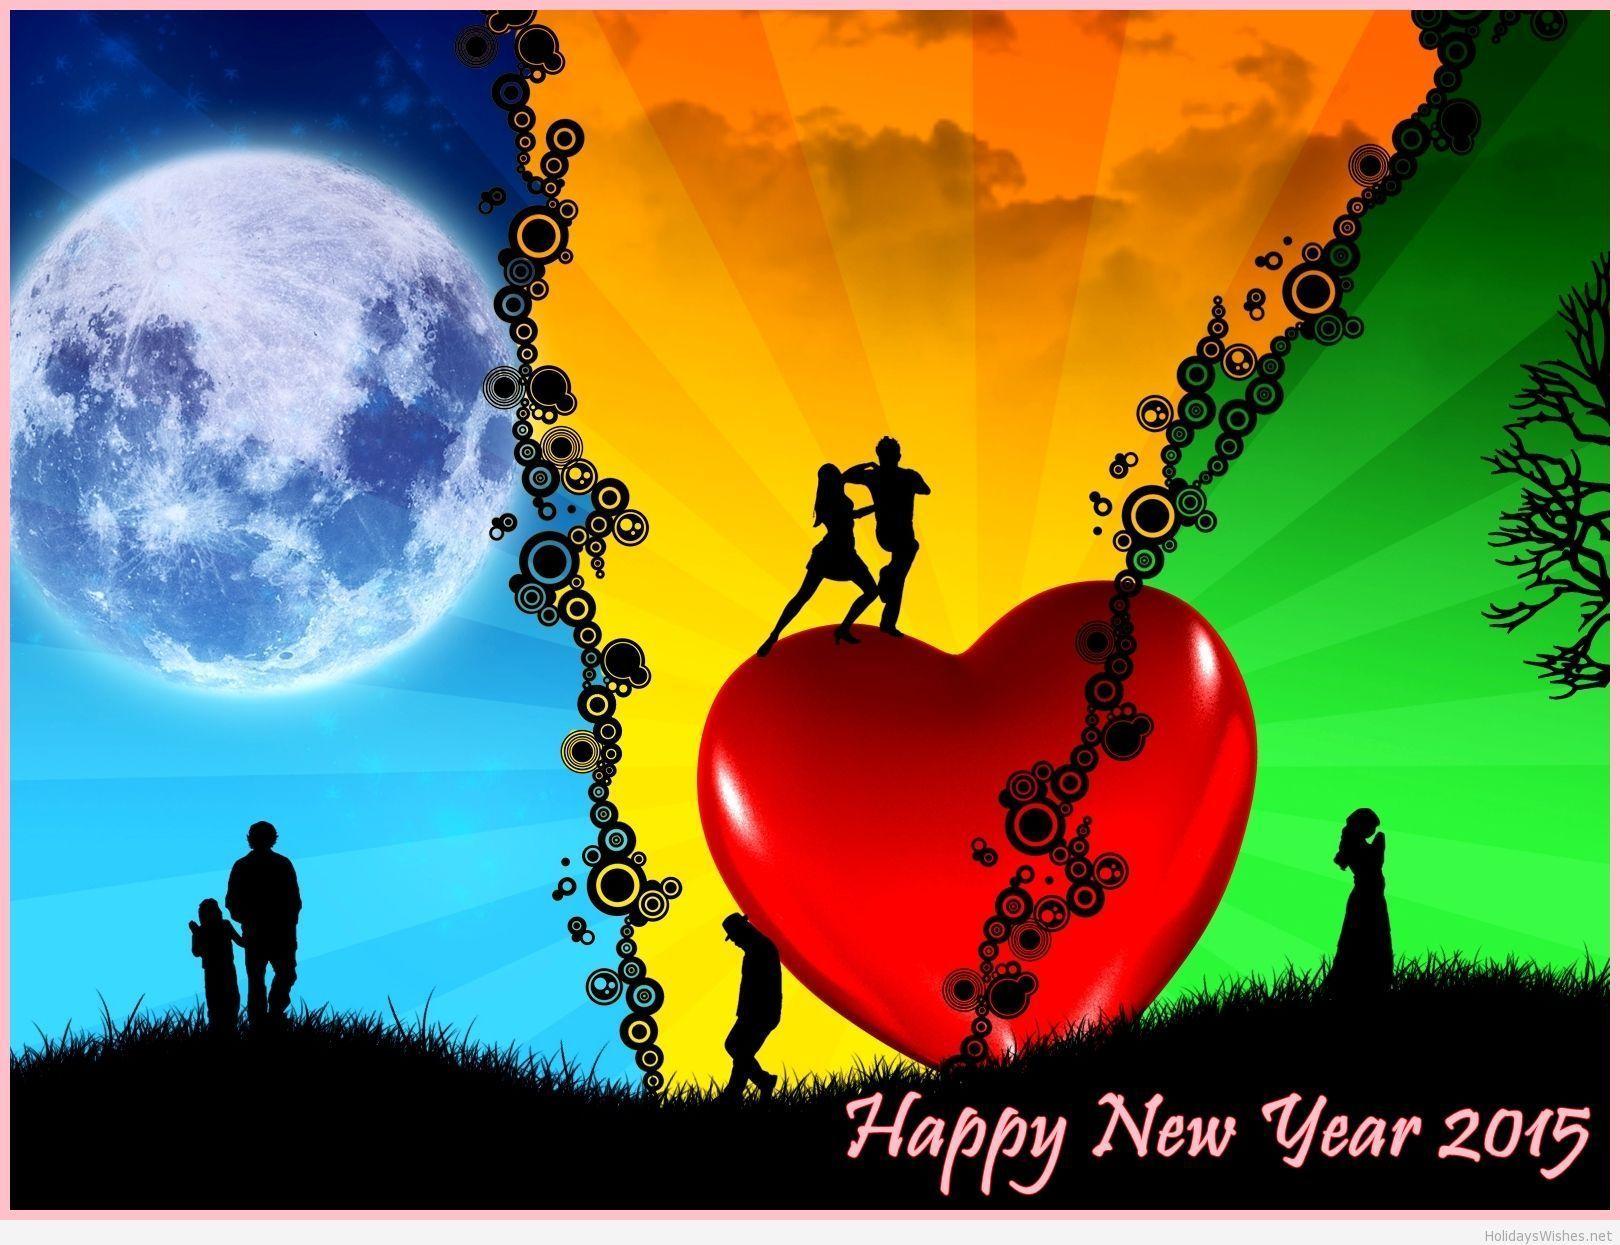 Hd love wallpaper for new year 2015